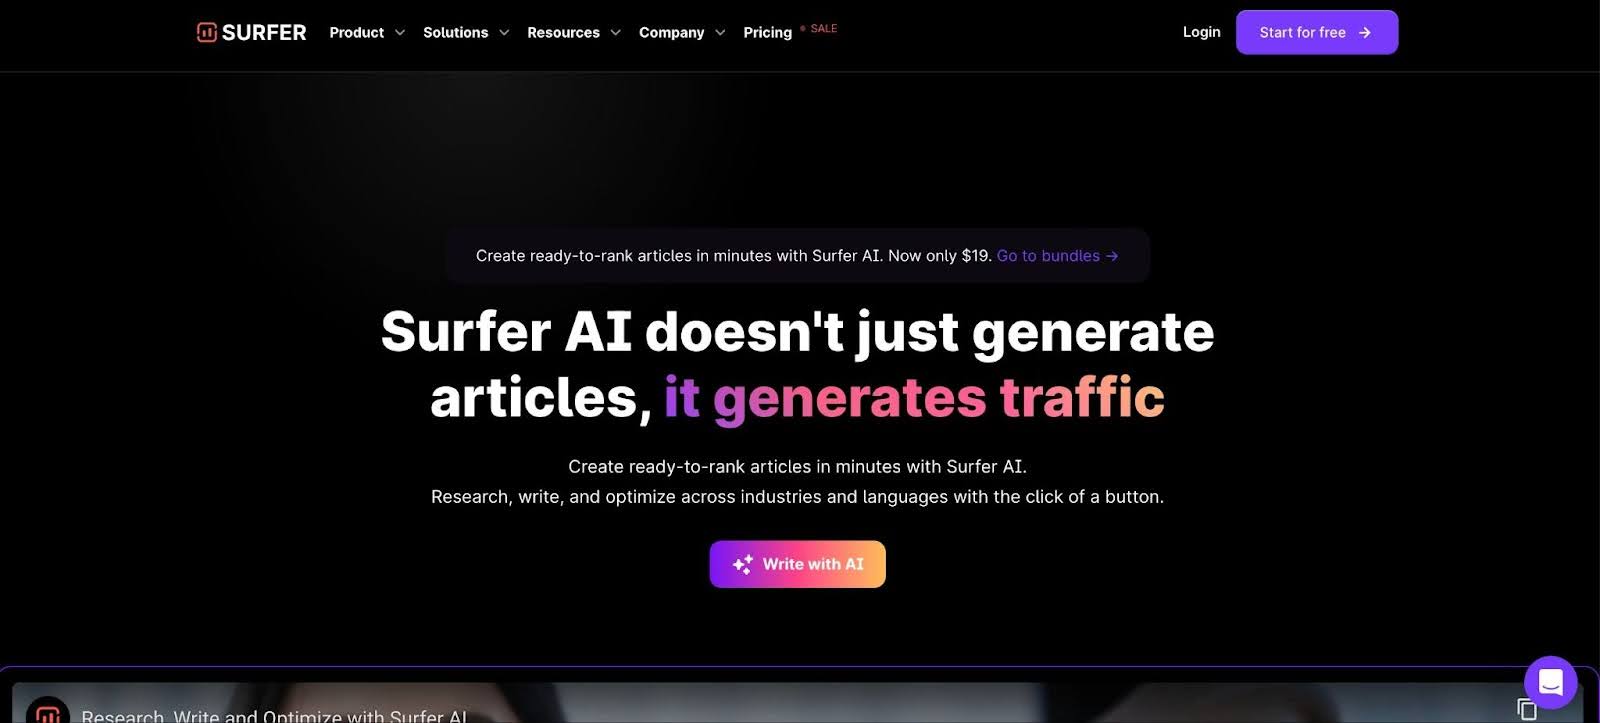 Black background product page: Surfer AI doesn't just generate articles, it generates traffic.